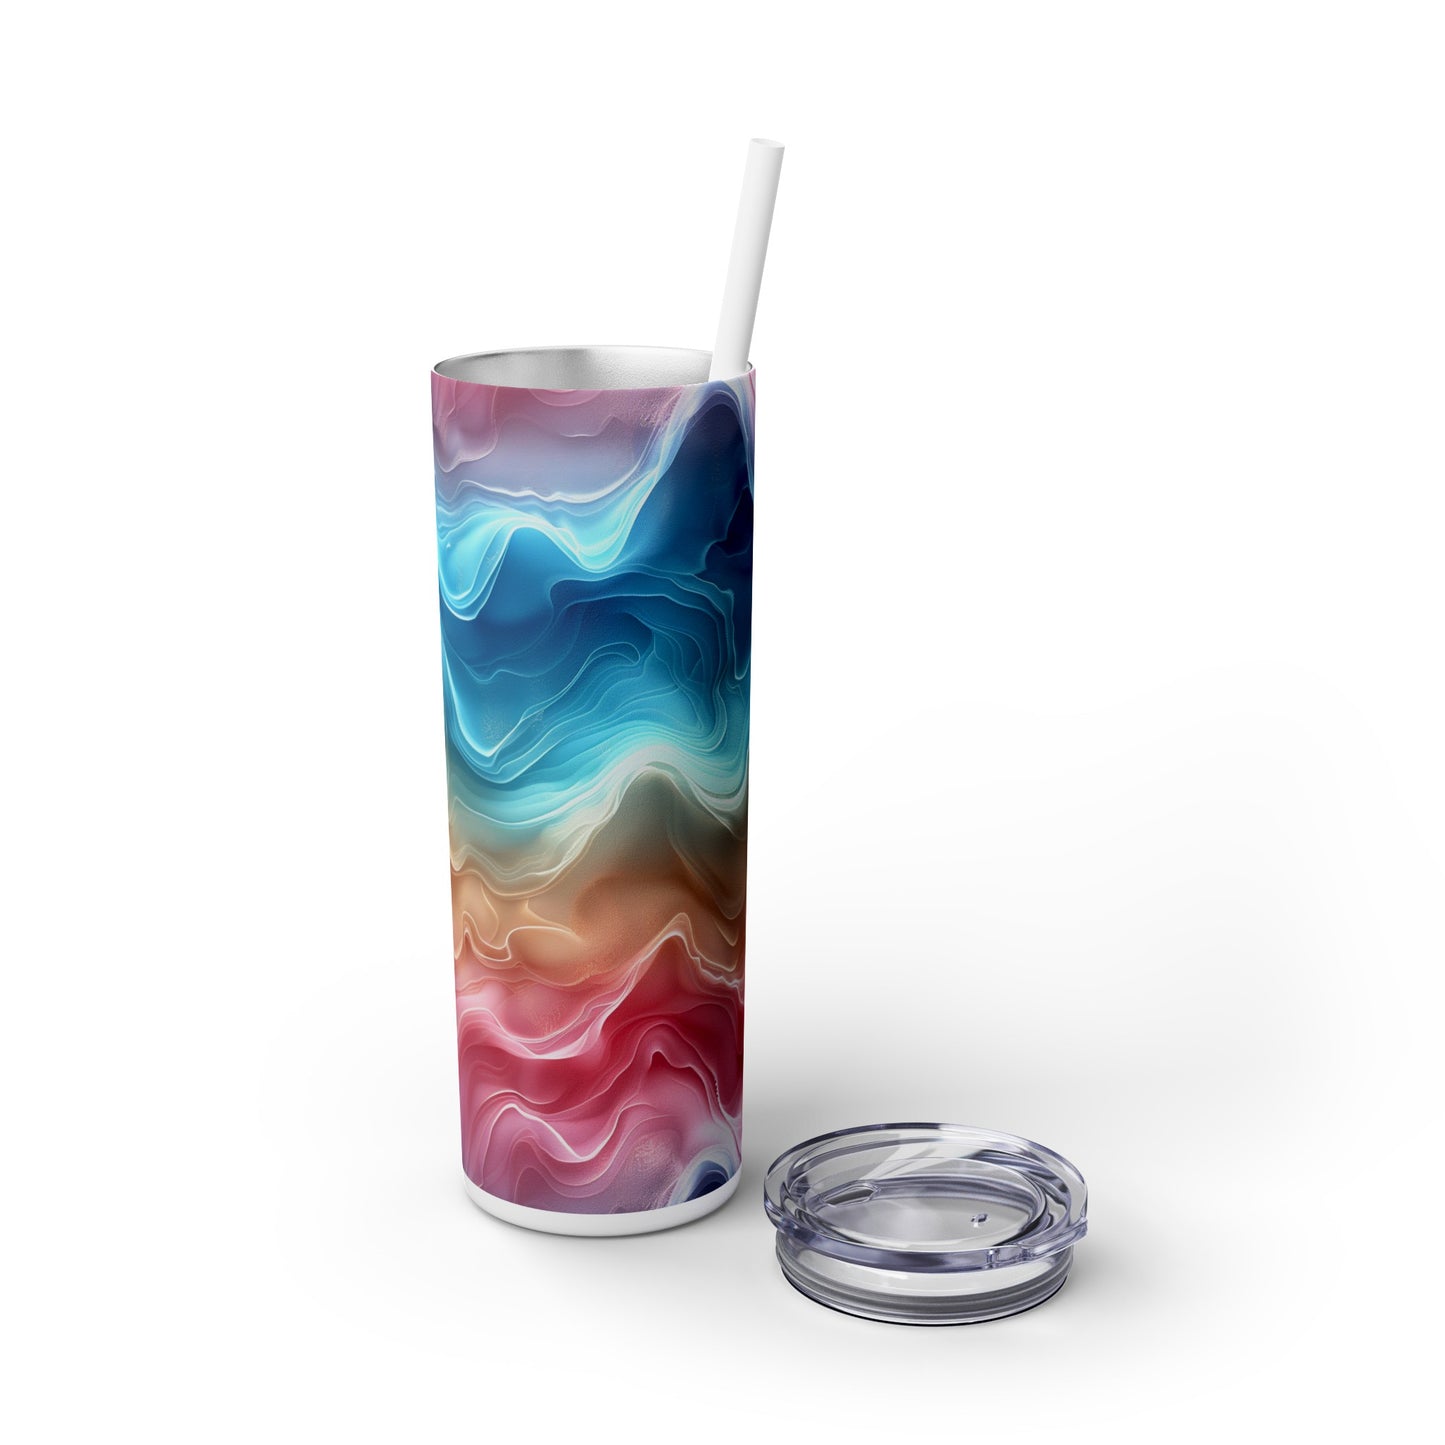 3D Pastel Waves Design Skinny Tumbler with Straw, 20oz